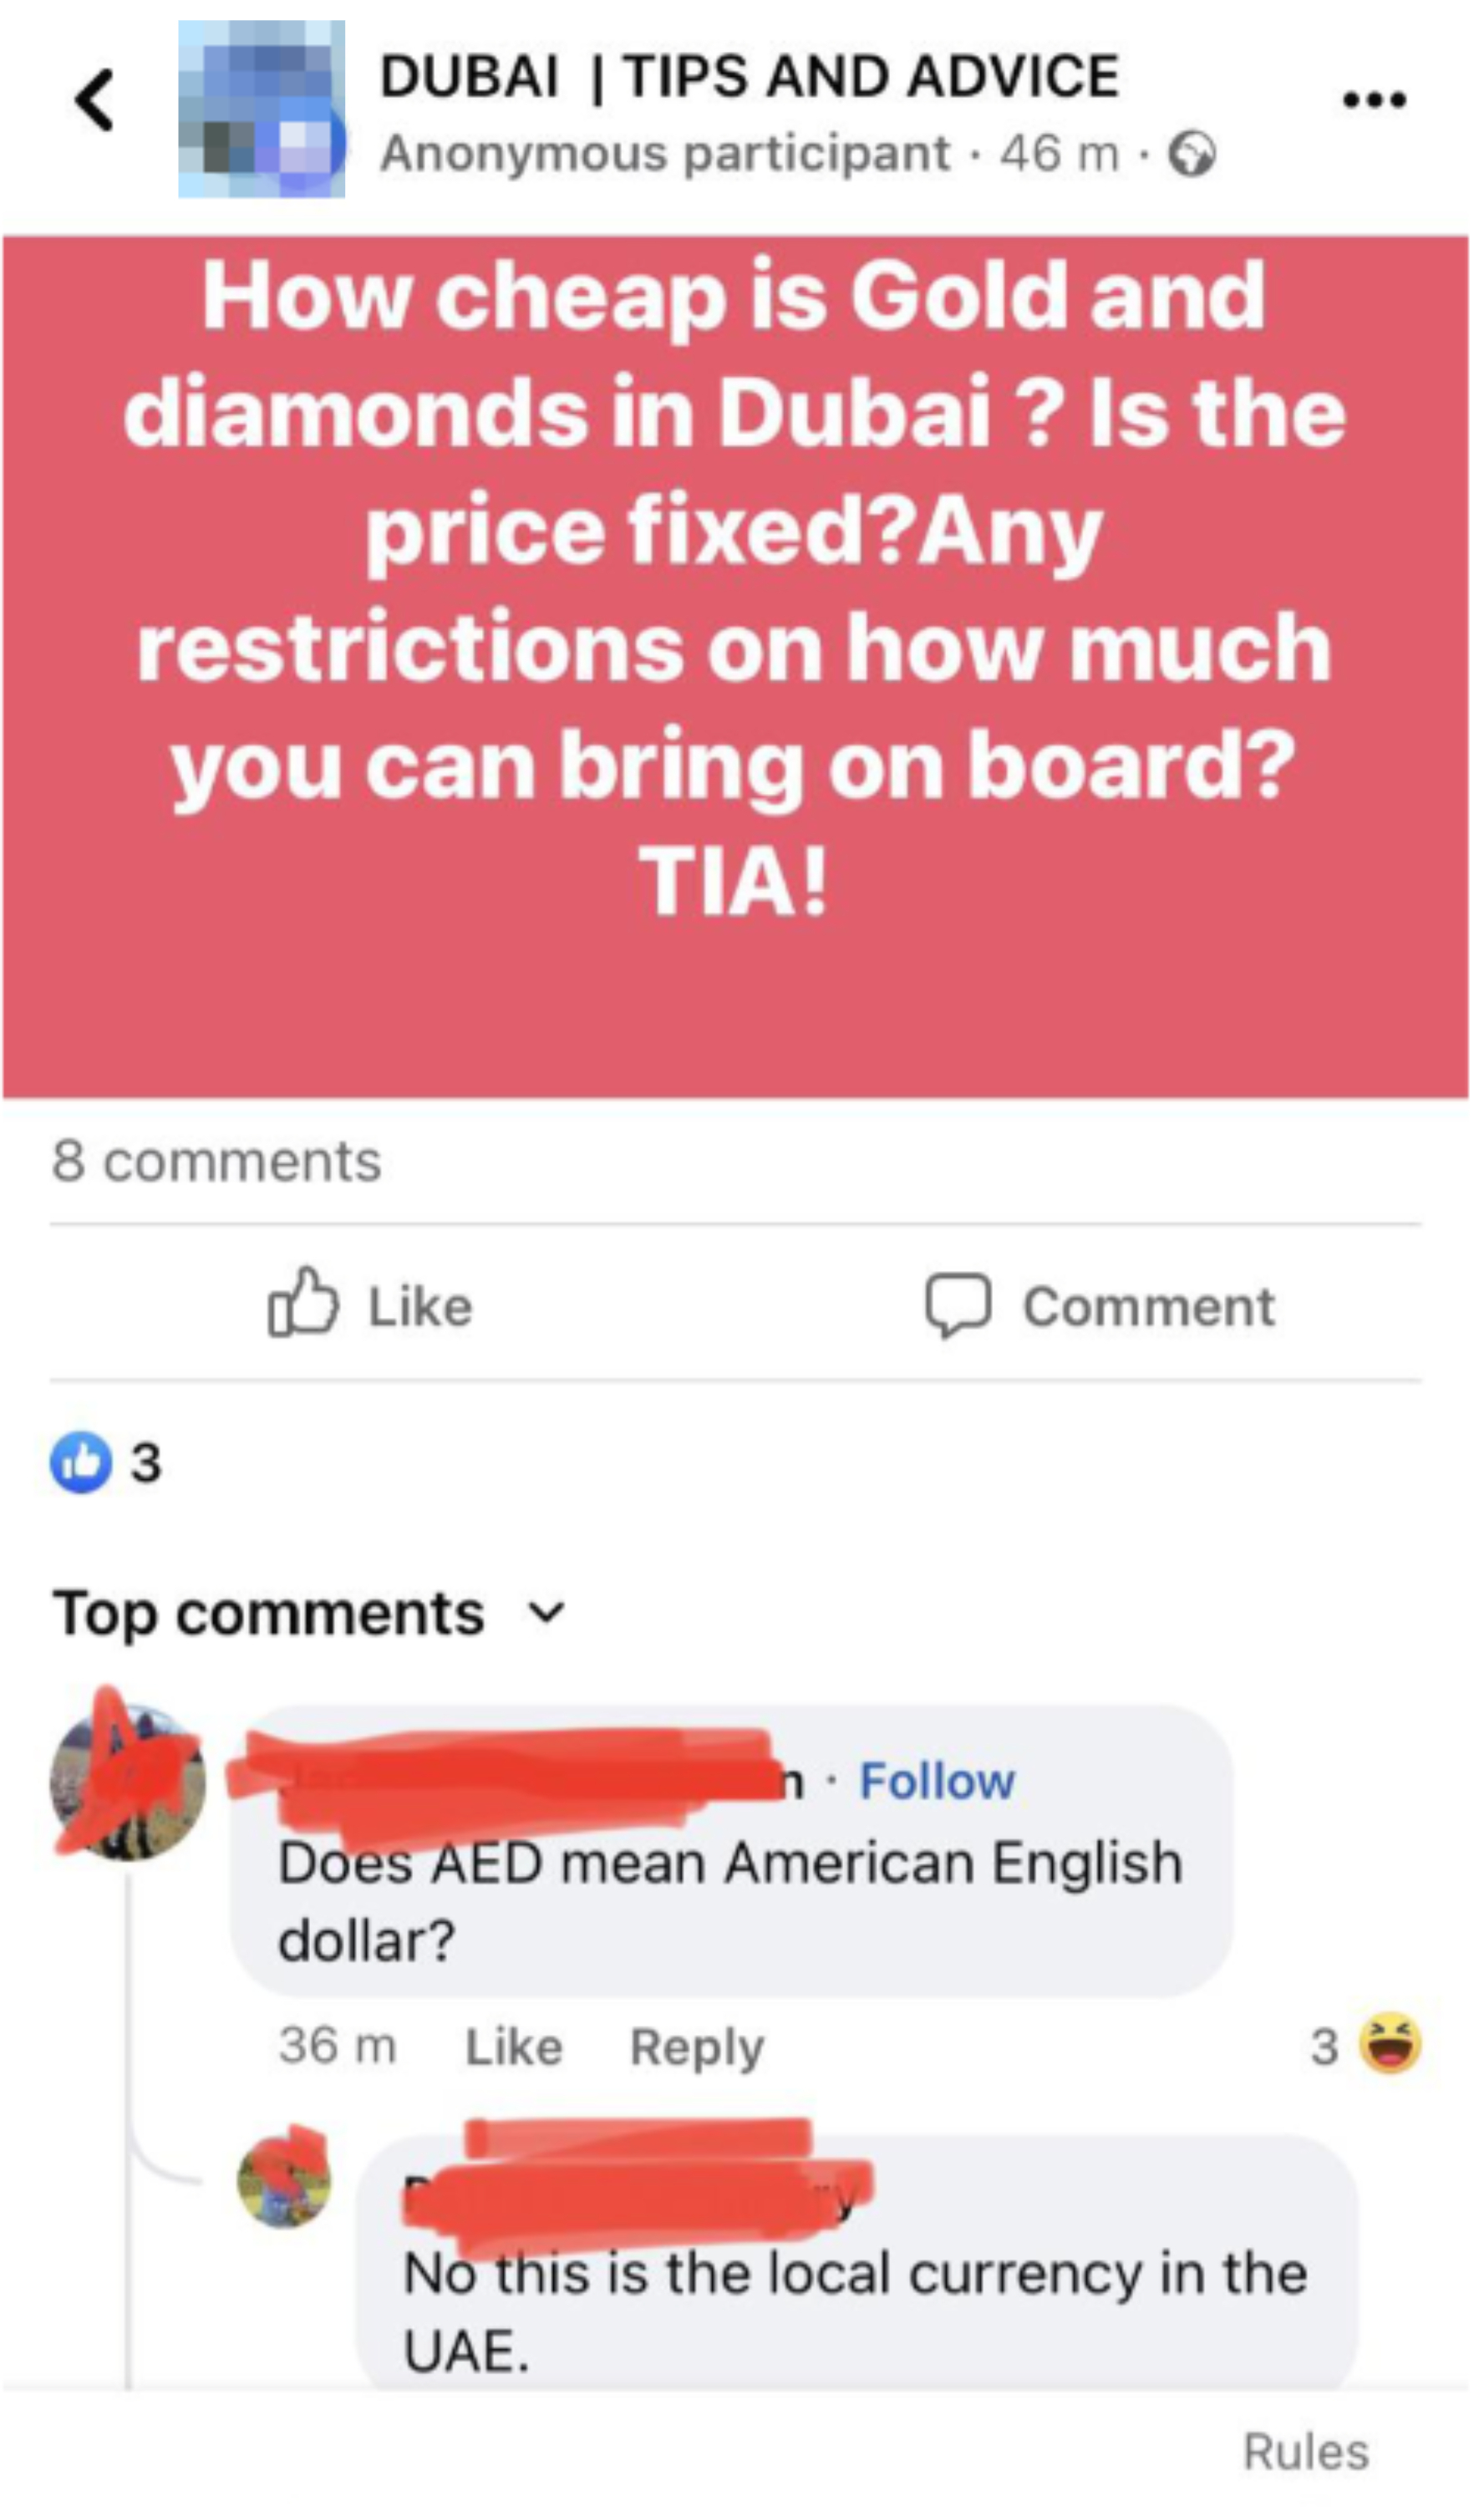 The image shows a screenshot of a social media post asking for tips on how to buy gold in Dubai and whether the price is fixed. There are comments below, one asking what &quot;AED&quot; means